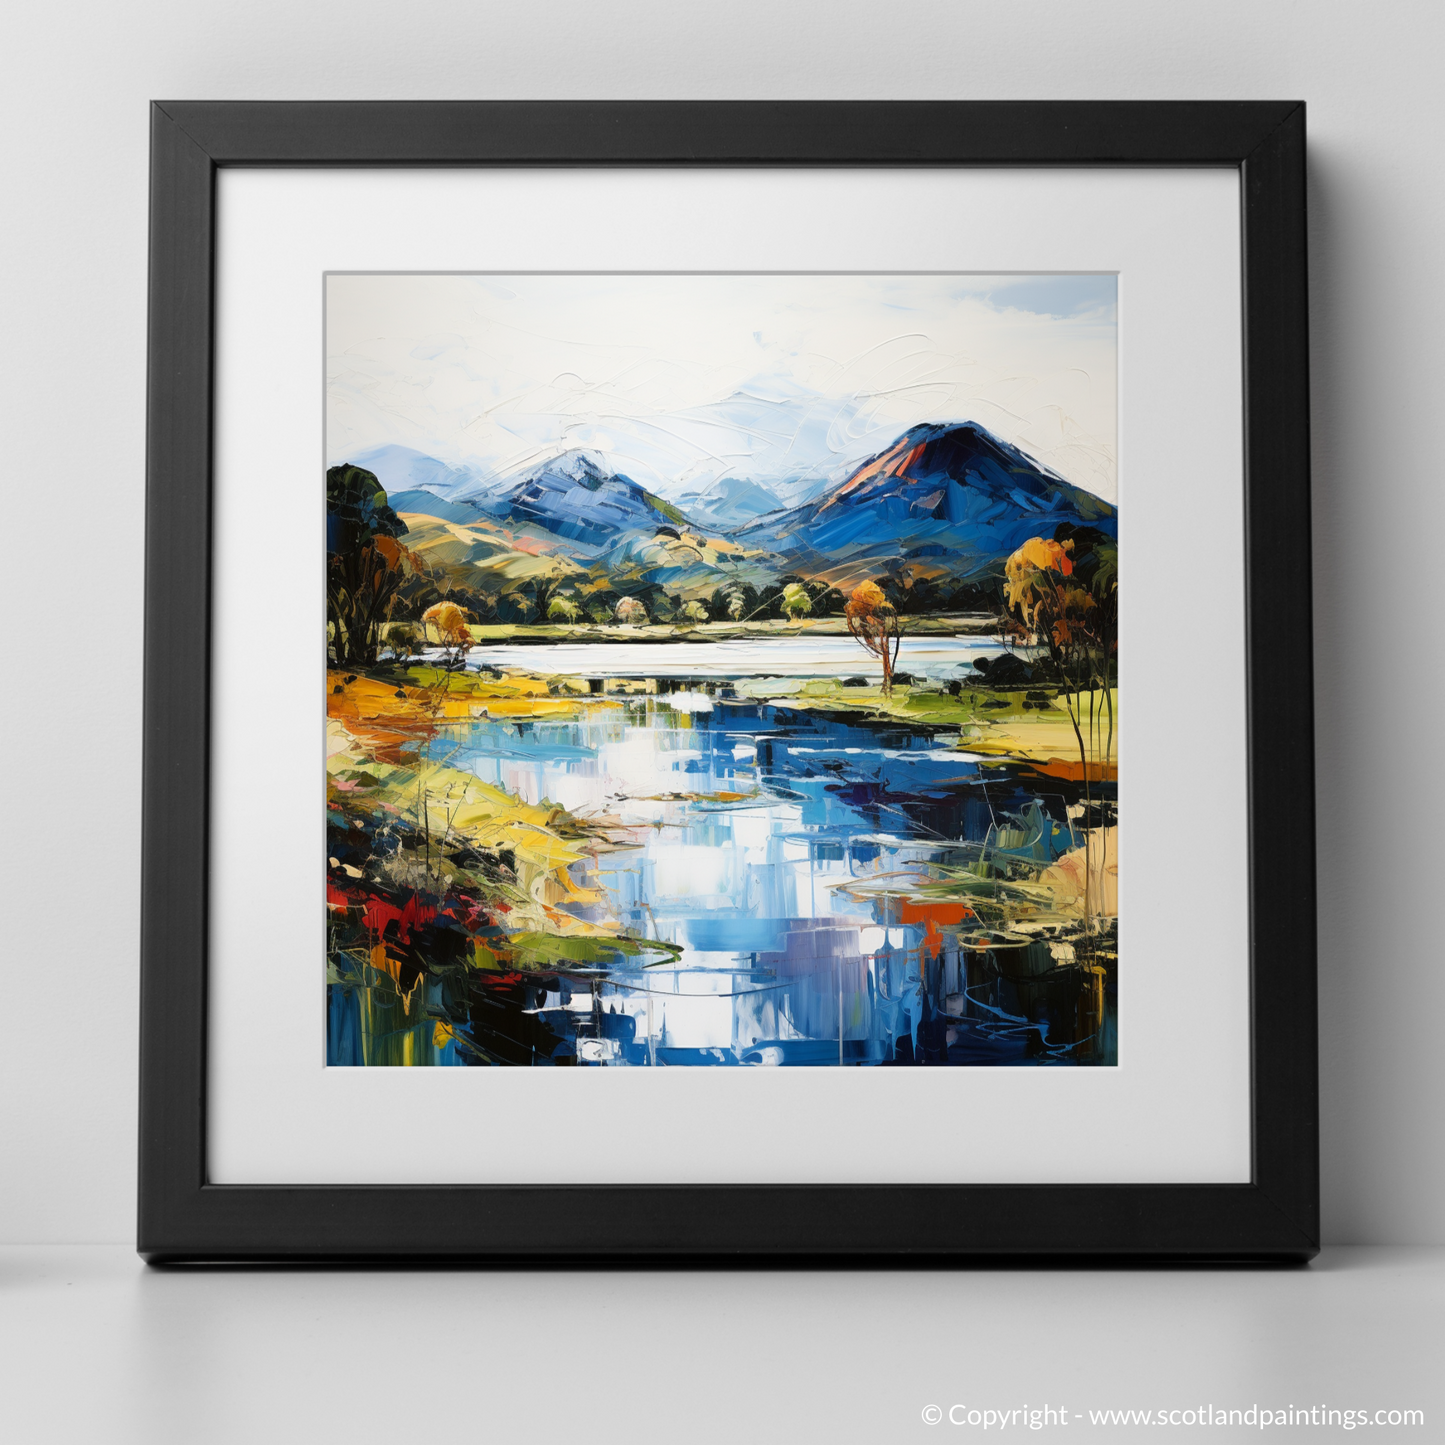 Art Print of Loch Ard, Stirling with a black frame